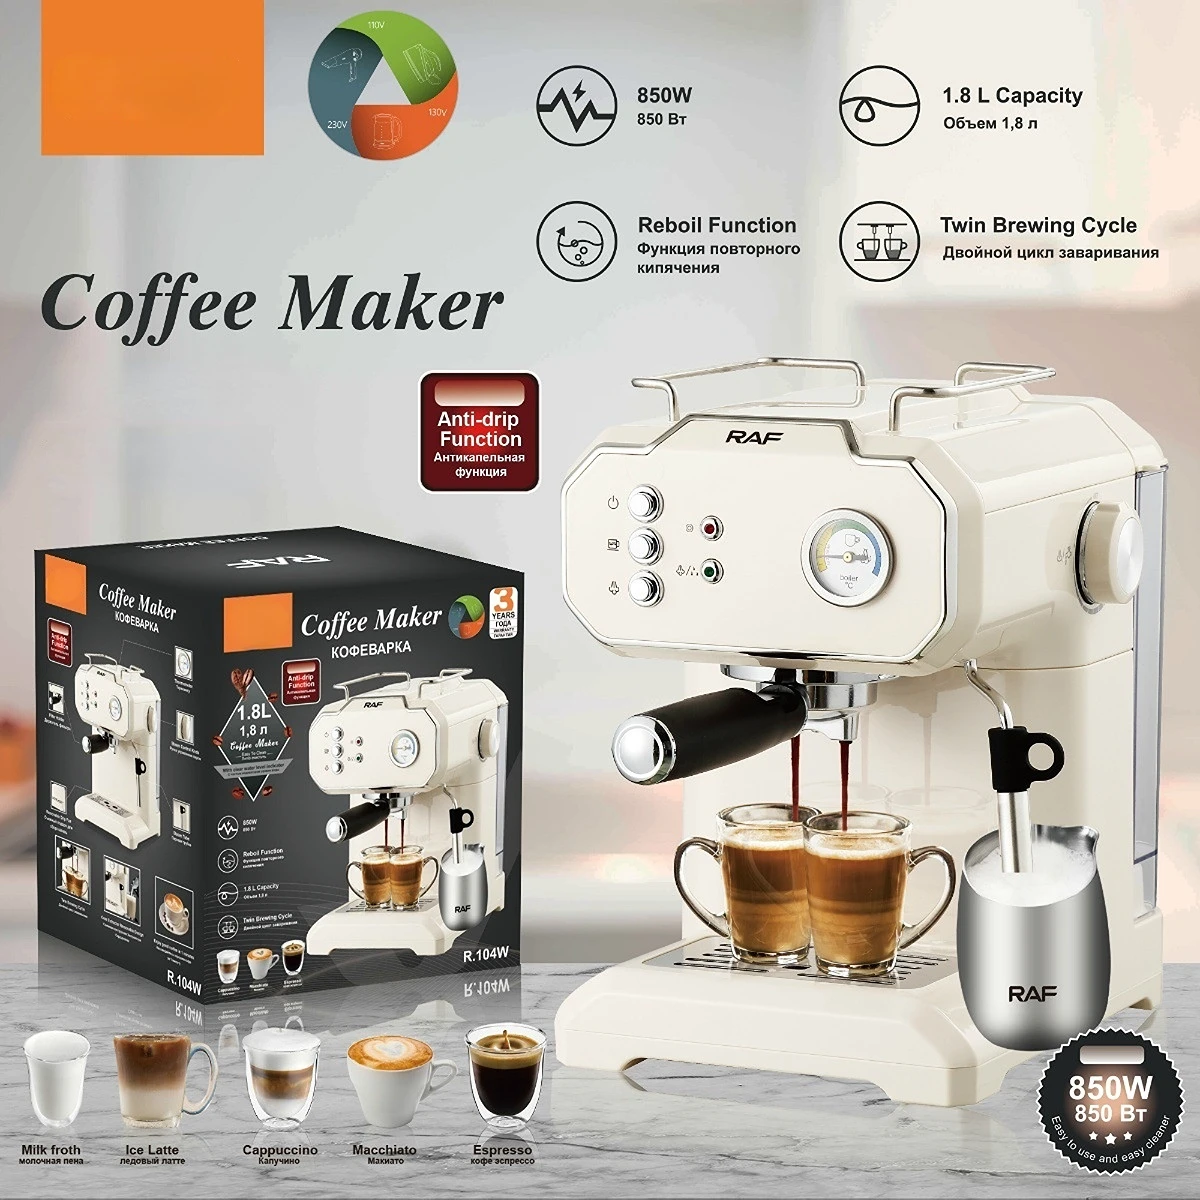 https://ae01.alicdn.com/kf/S7fc34e50990f4ecc9339ae10f4dc9ad44/Household-Small-Coffee-Machine-Electric-Milk-Frother-1-5L-Water-Tank-Maker-Offer-Free-Shipping-Italian.jpg